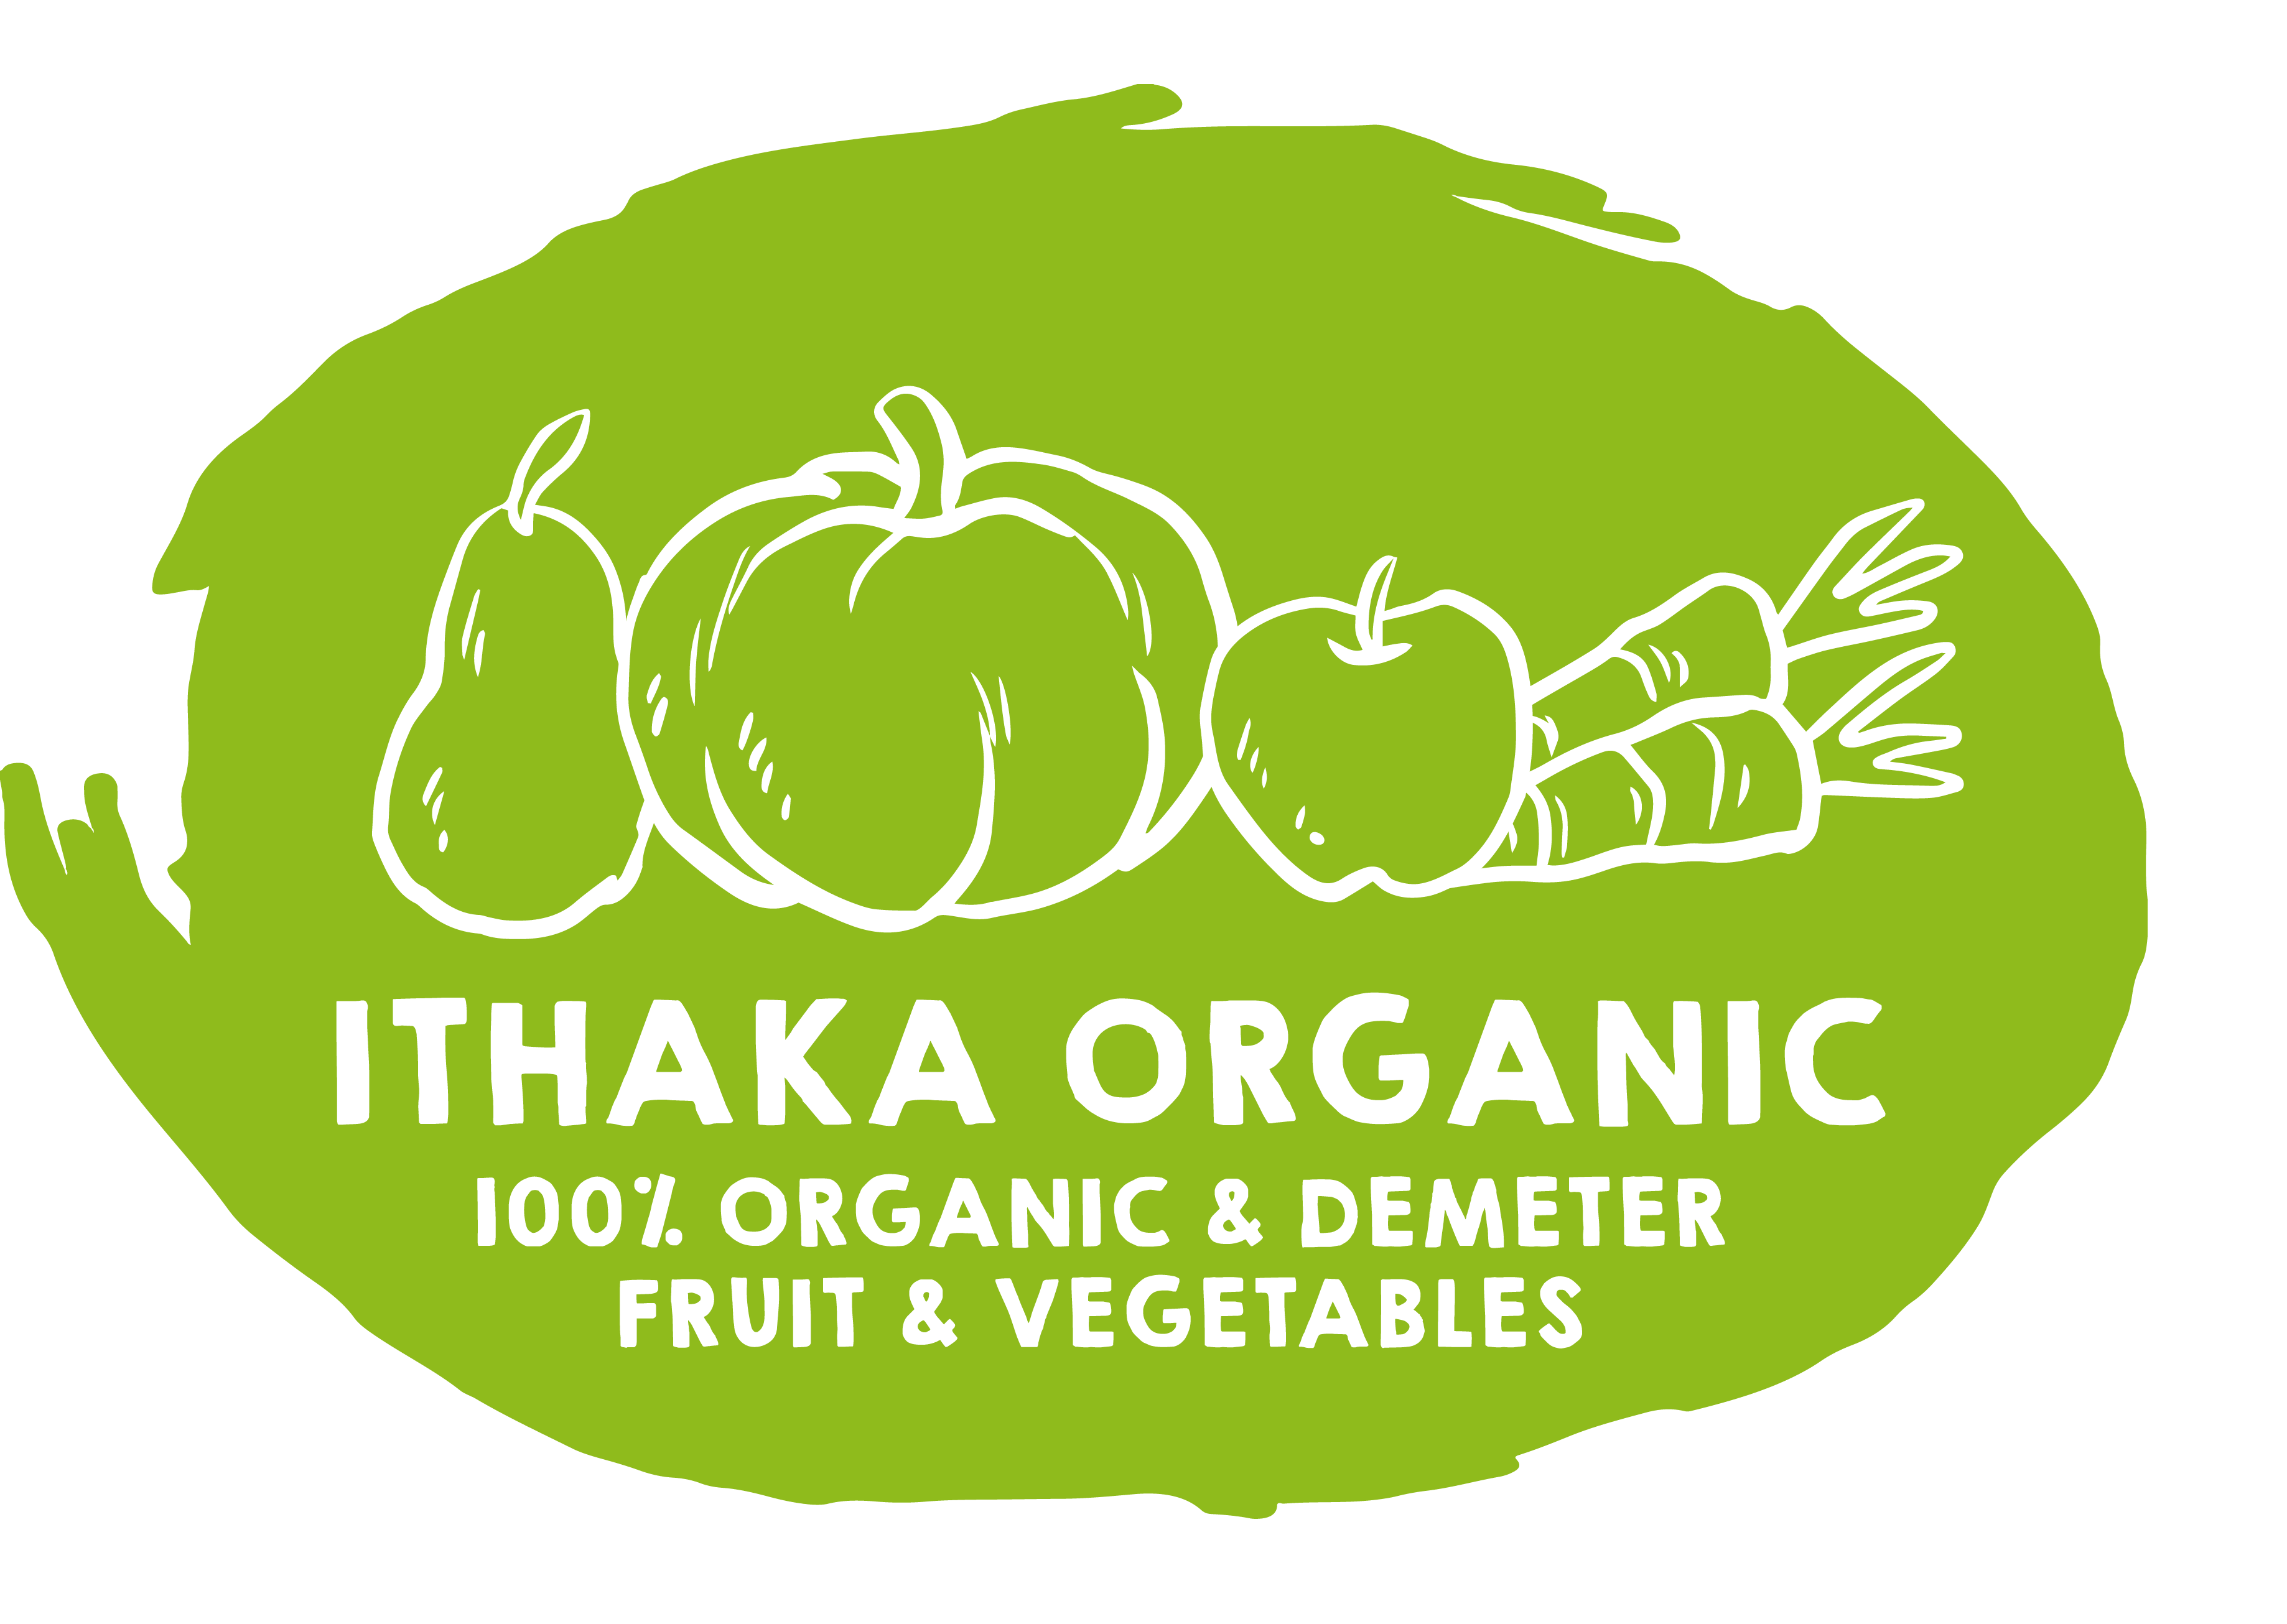 100% organic fruit and vegetables